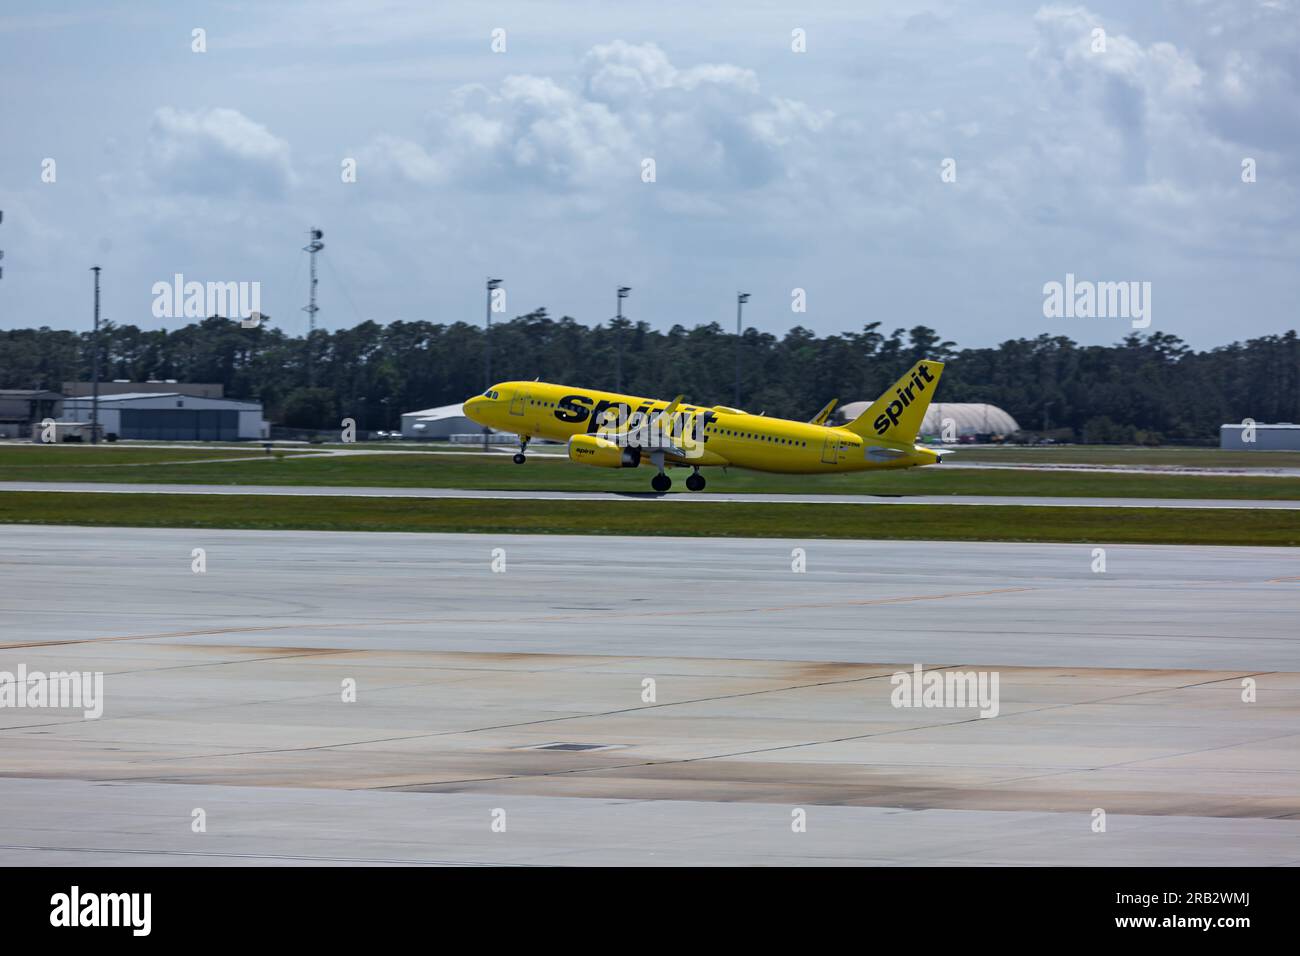 A Spirit Airlines Airbus A320 passenger jet airliner takes off from Myrtle Beach International Airport in Myrtle Beach, South Carolina, USA. Stock Photo